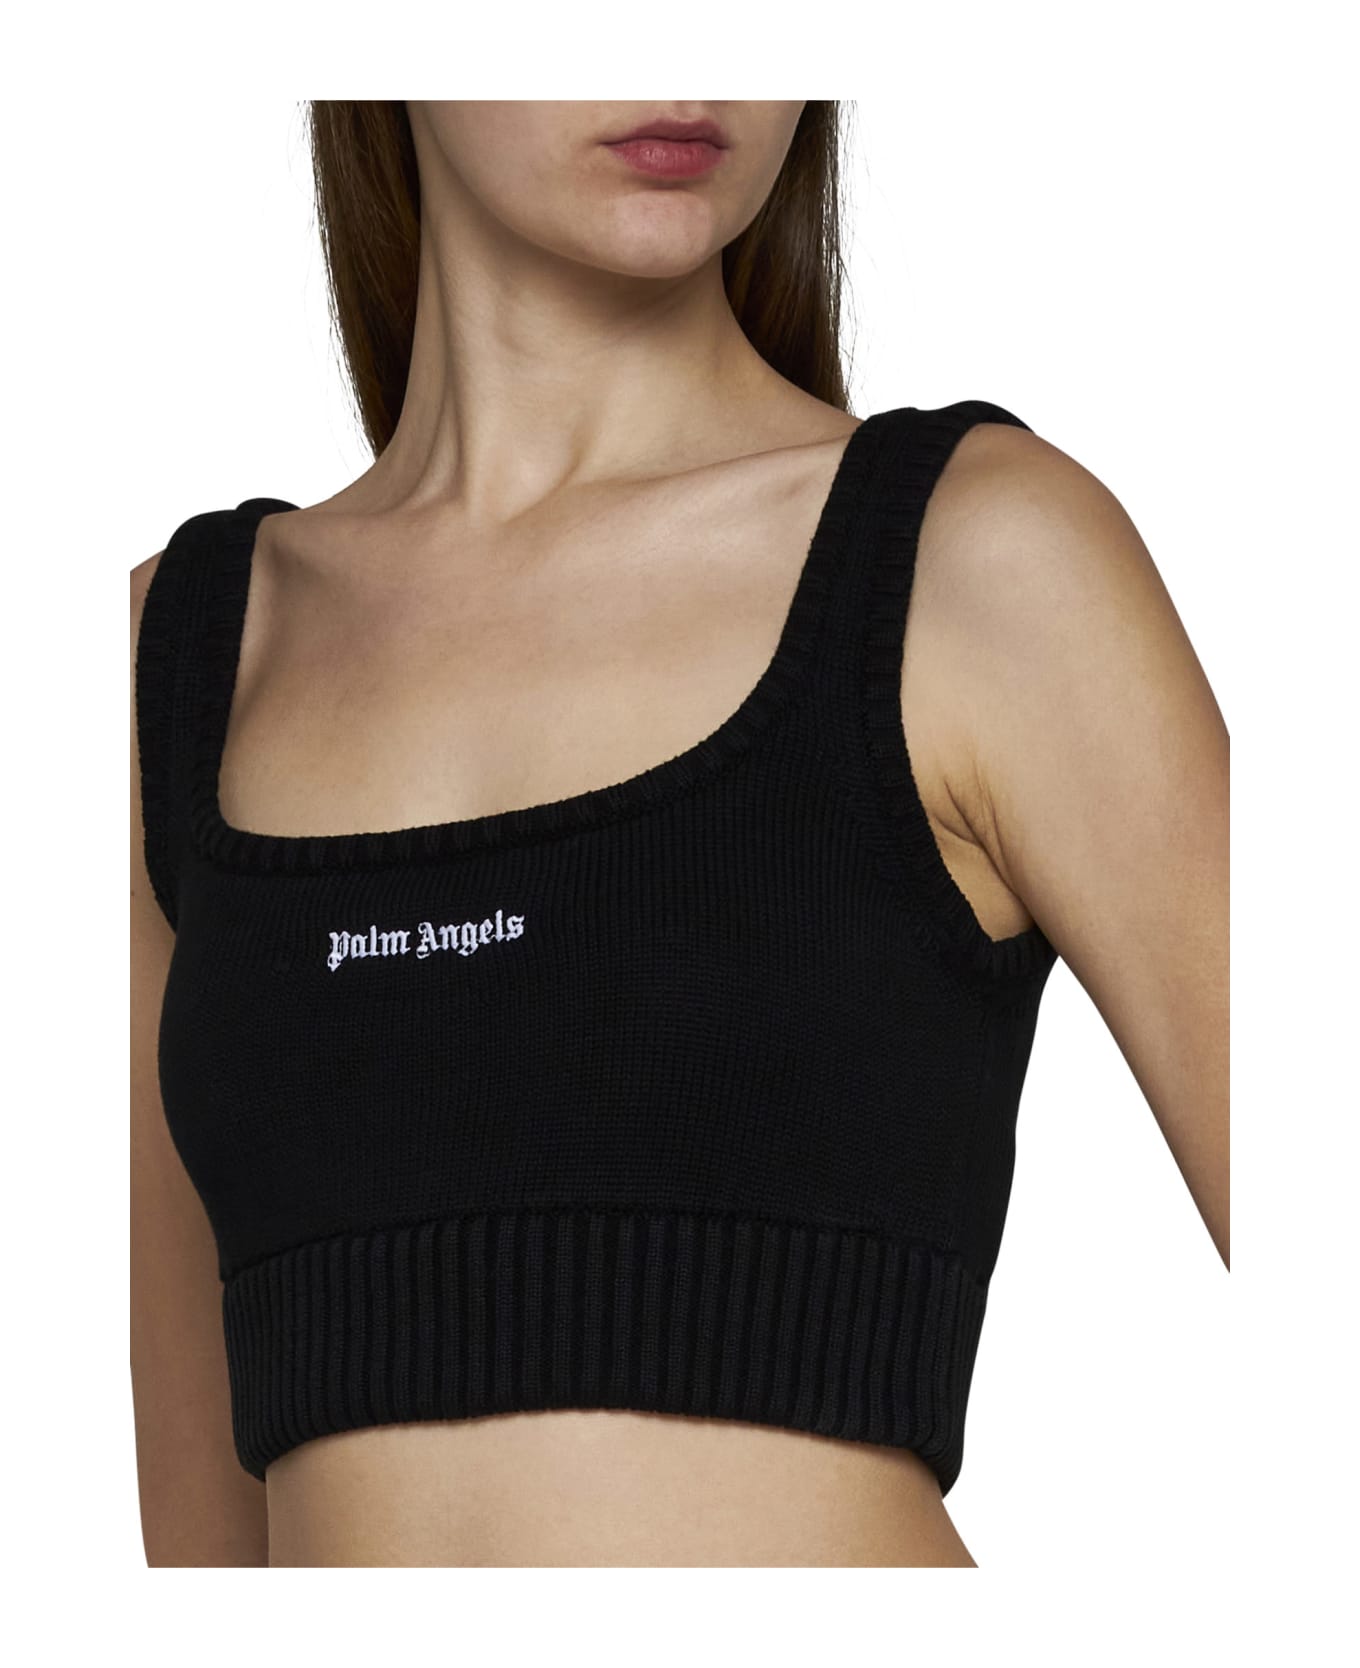 Palm Angels Logo Embroidered Cropped Knitted Tank Top - Black off white